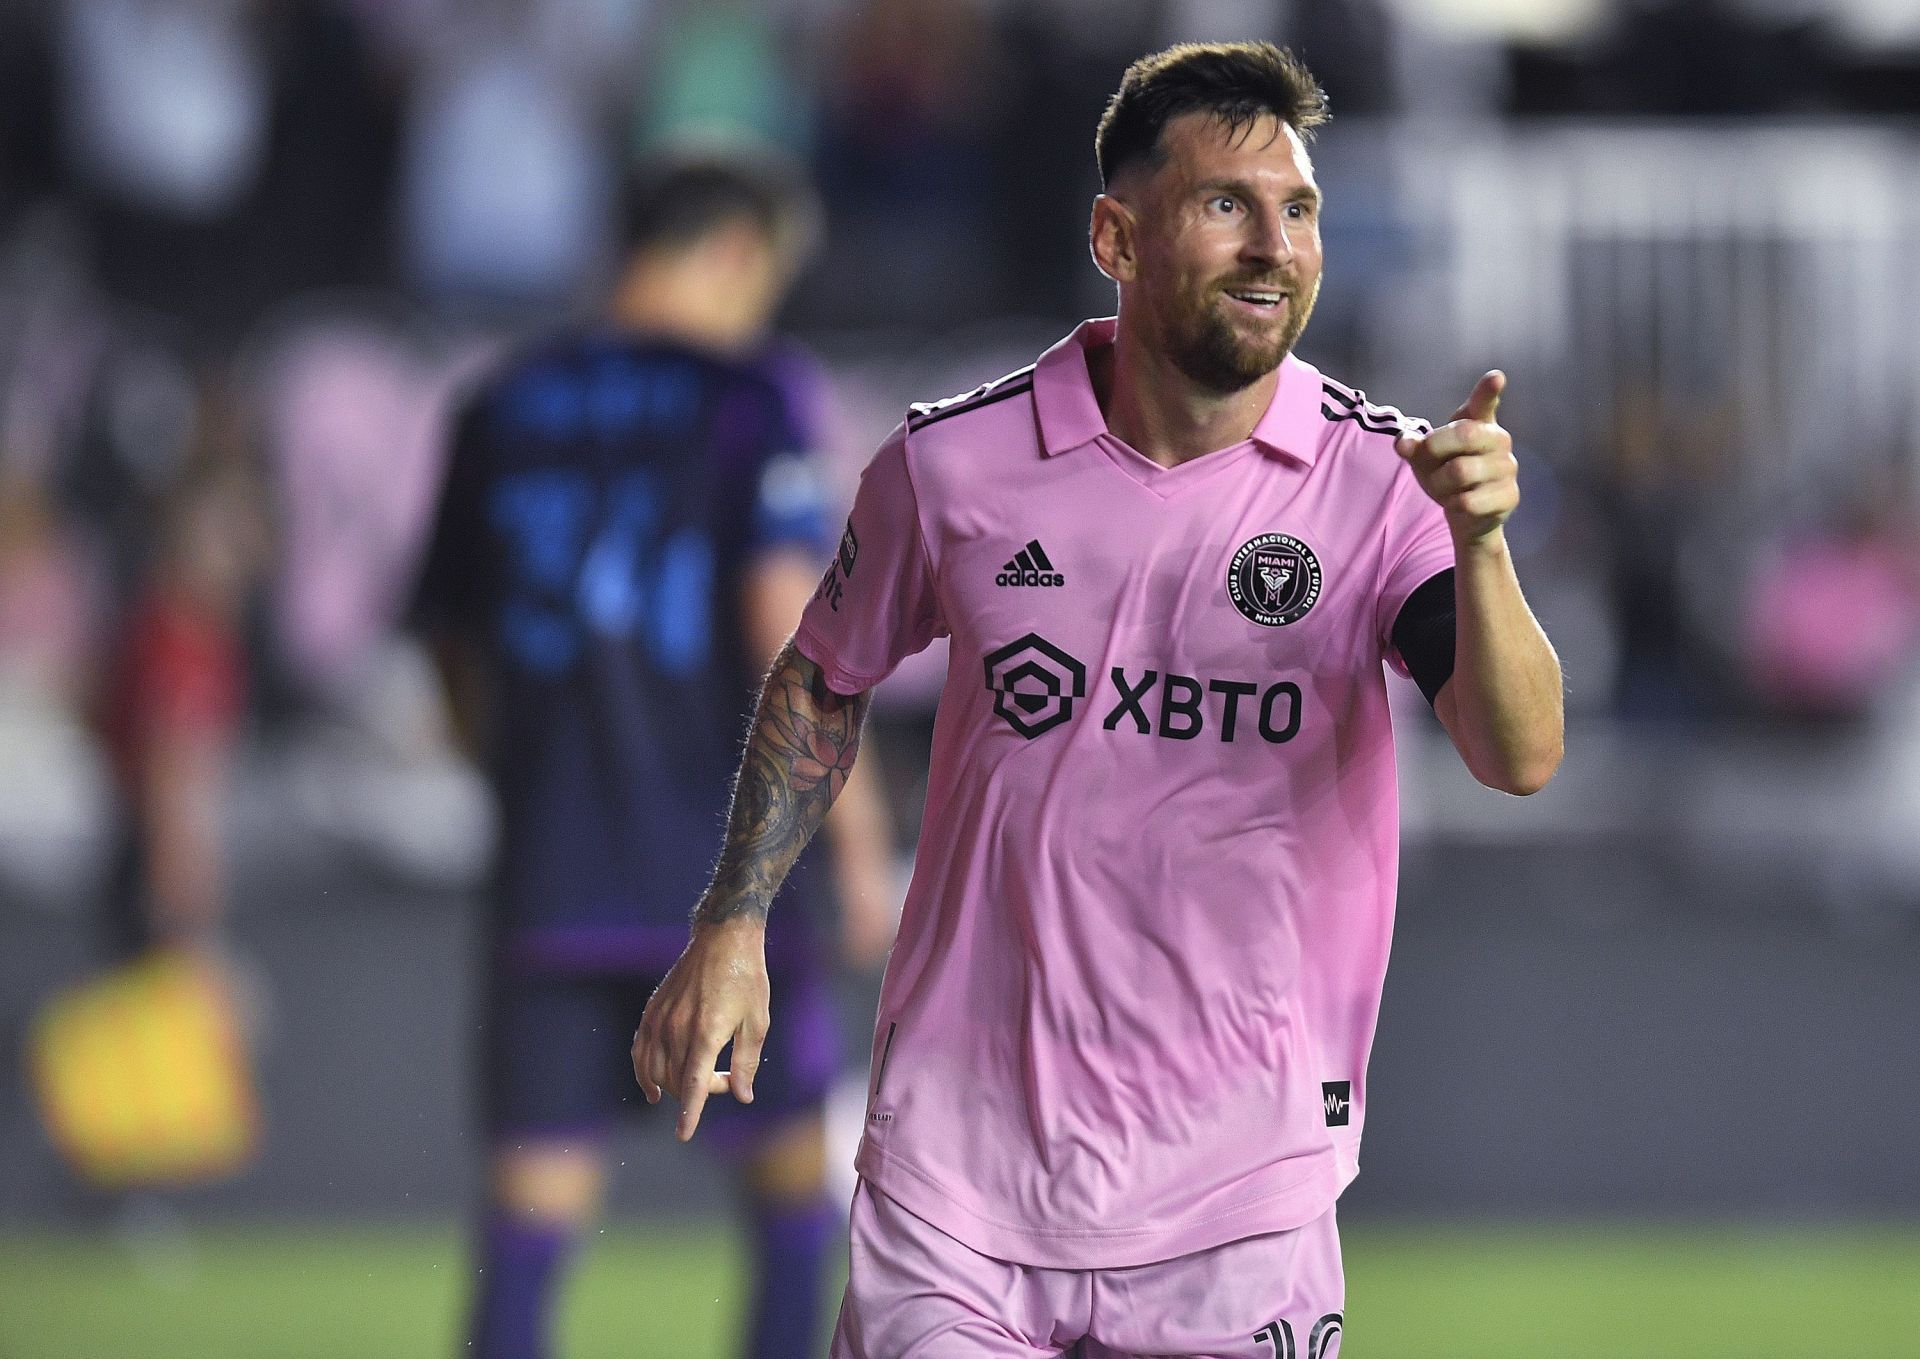 Lionel Messi has been on fire in the MLS.